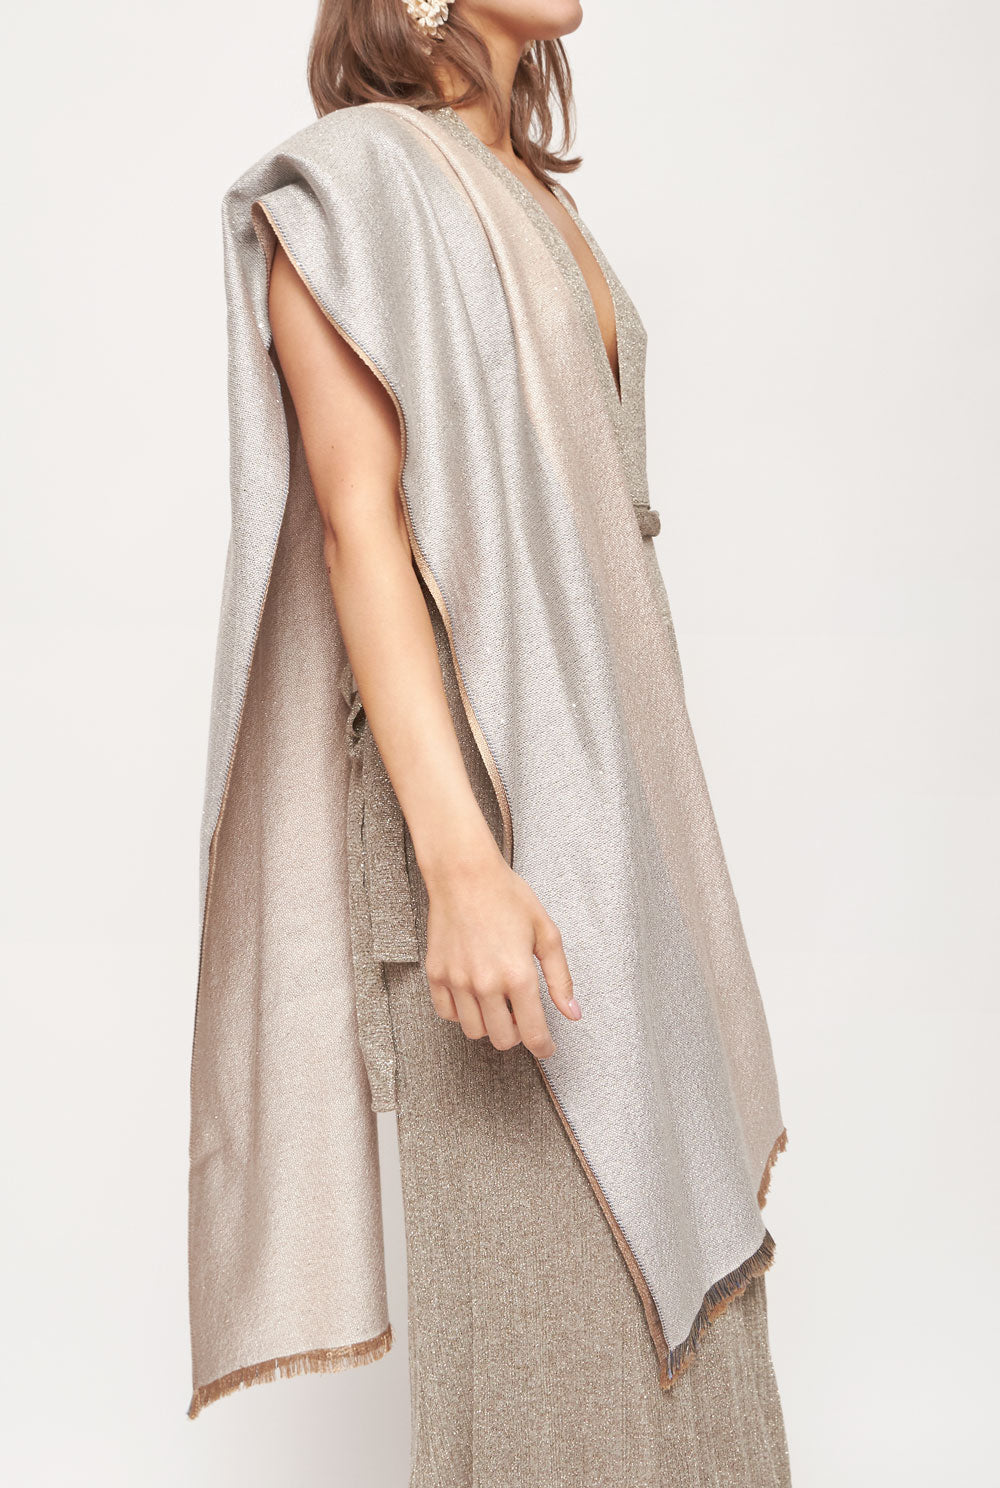 Cashmere and Silk Shawl in beige with sequins scarve Victoria de Talhora 